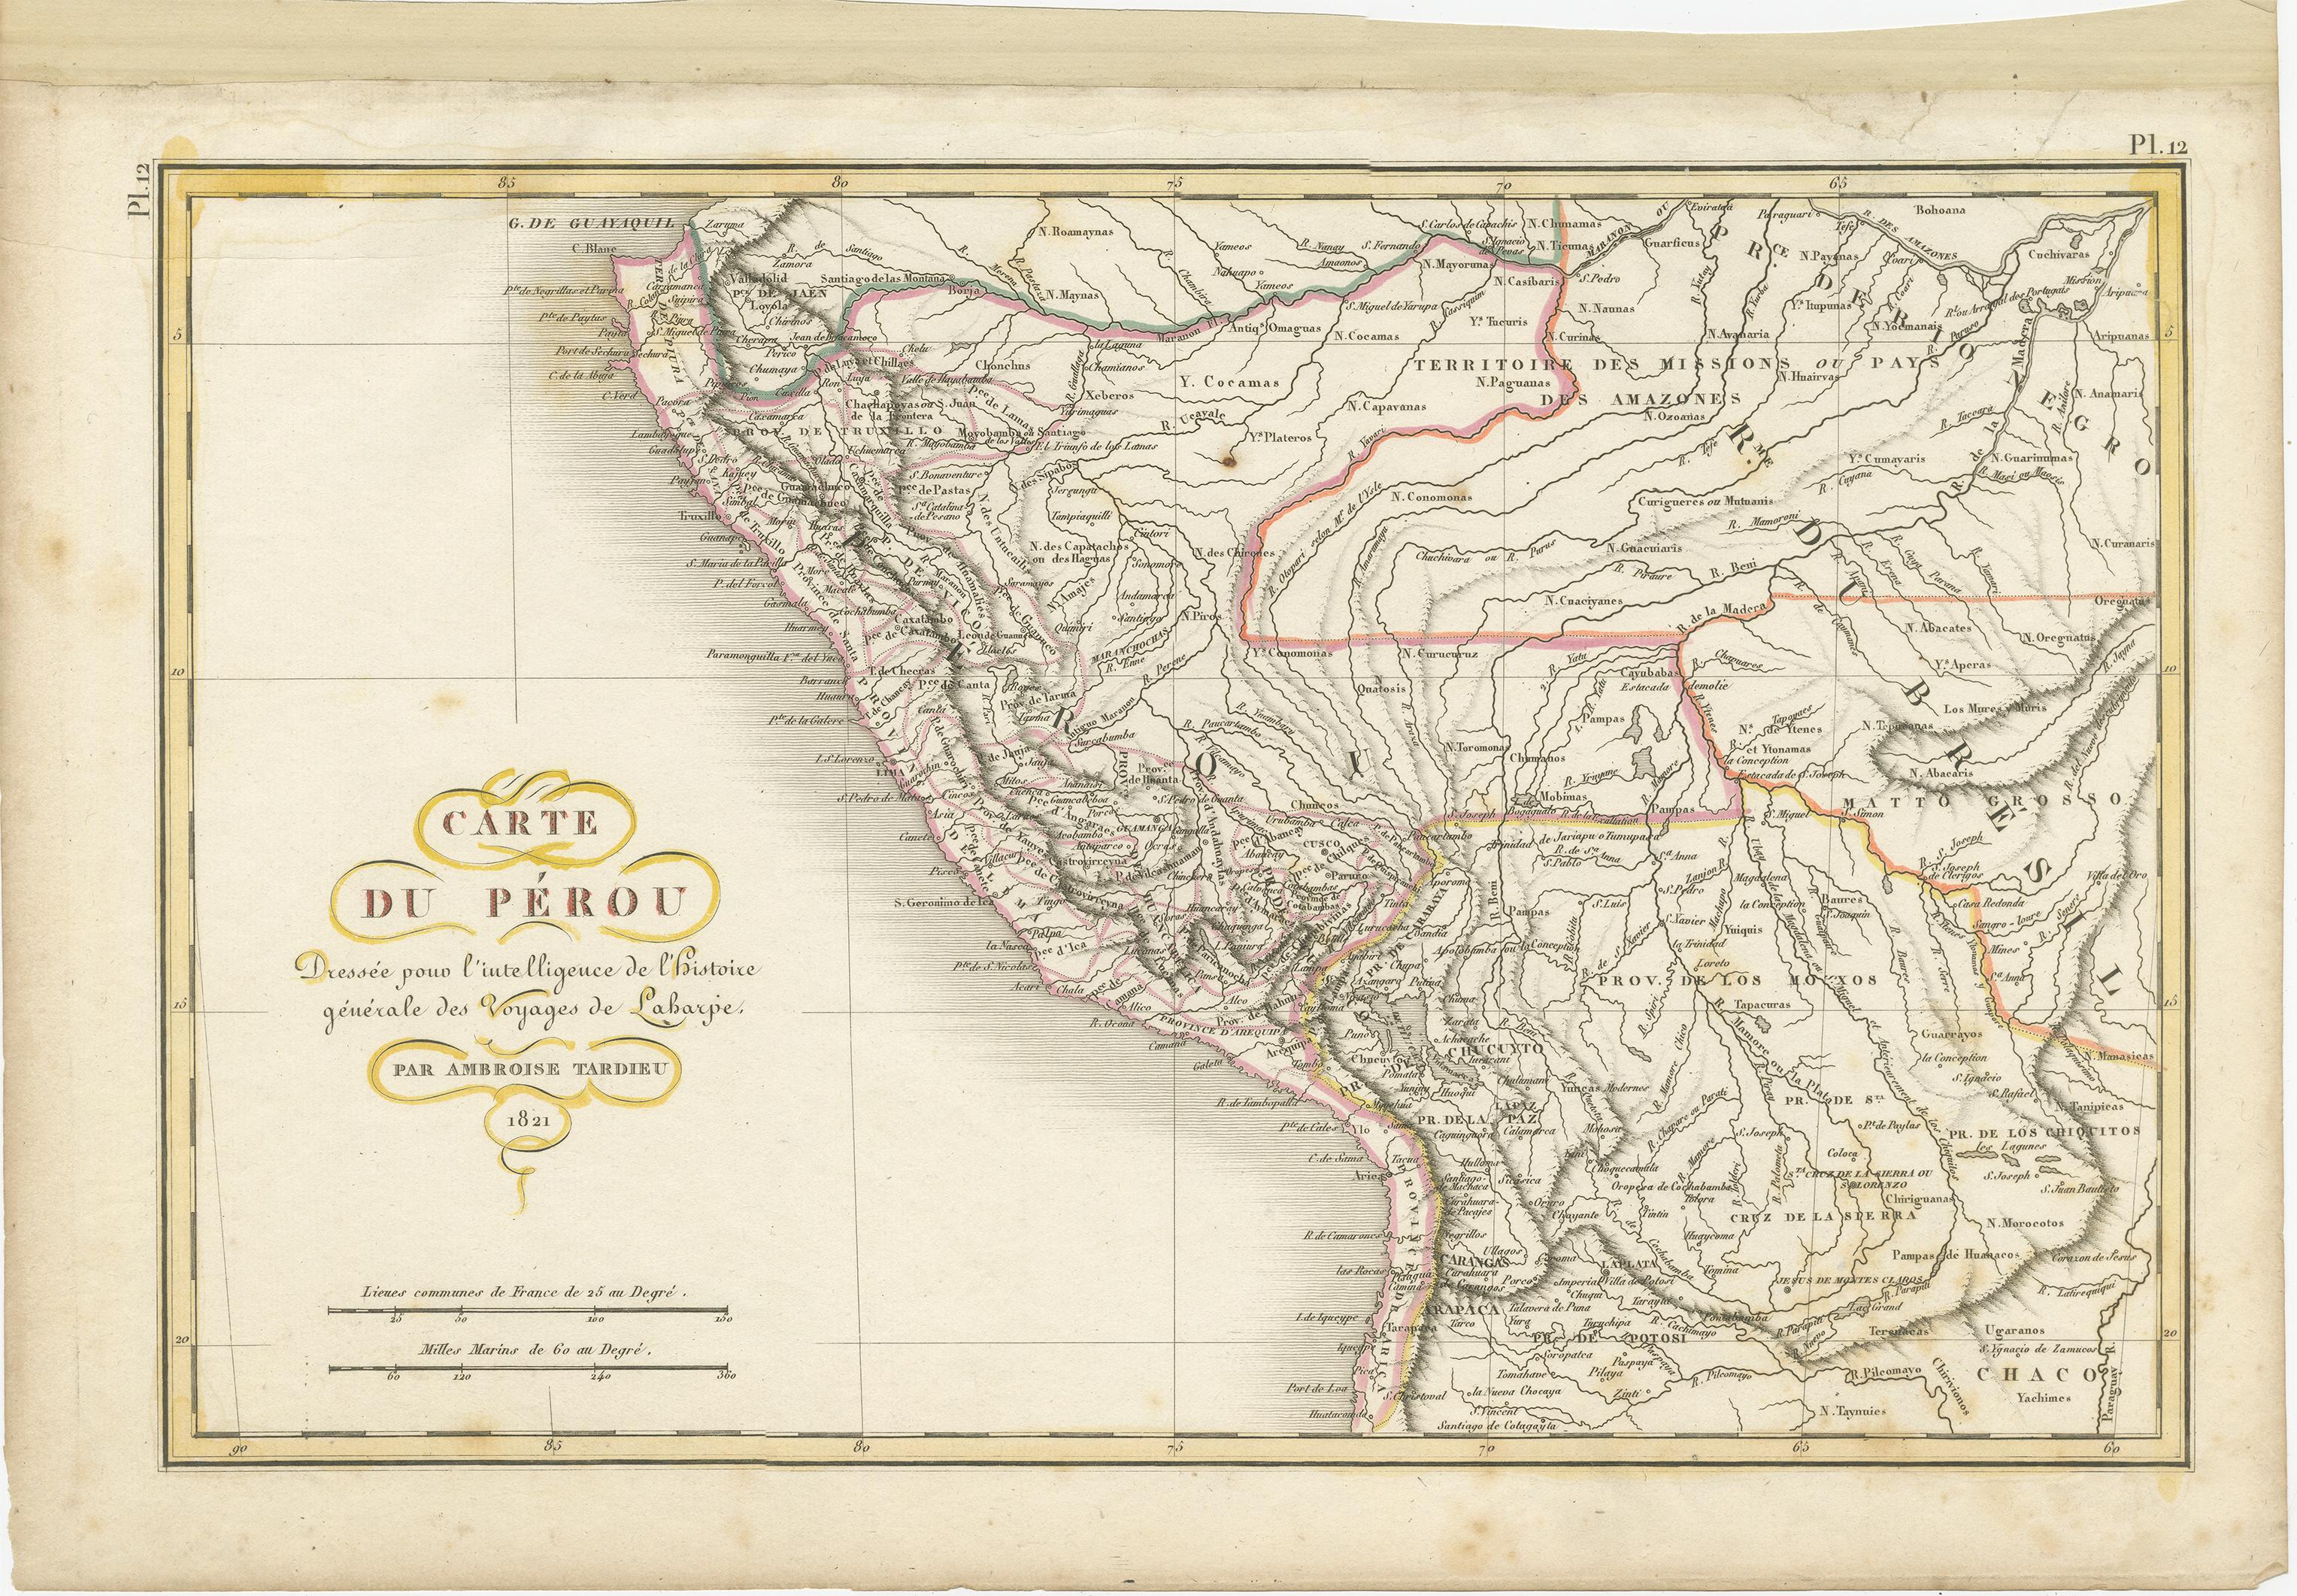 Antique map titled 'Carte du Pérou'. This map of Peru and the surrounding region shows excellent detail of the river systems and mountain ranges in the area.

Published by A. Tardieu, 1821. Ambroise Tardieu (2 March 1788, in Paris – 17 January